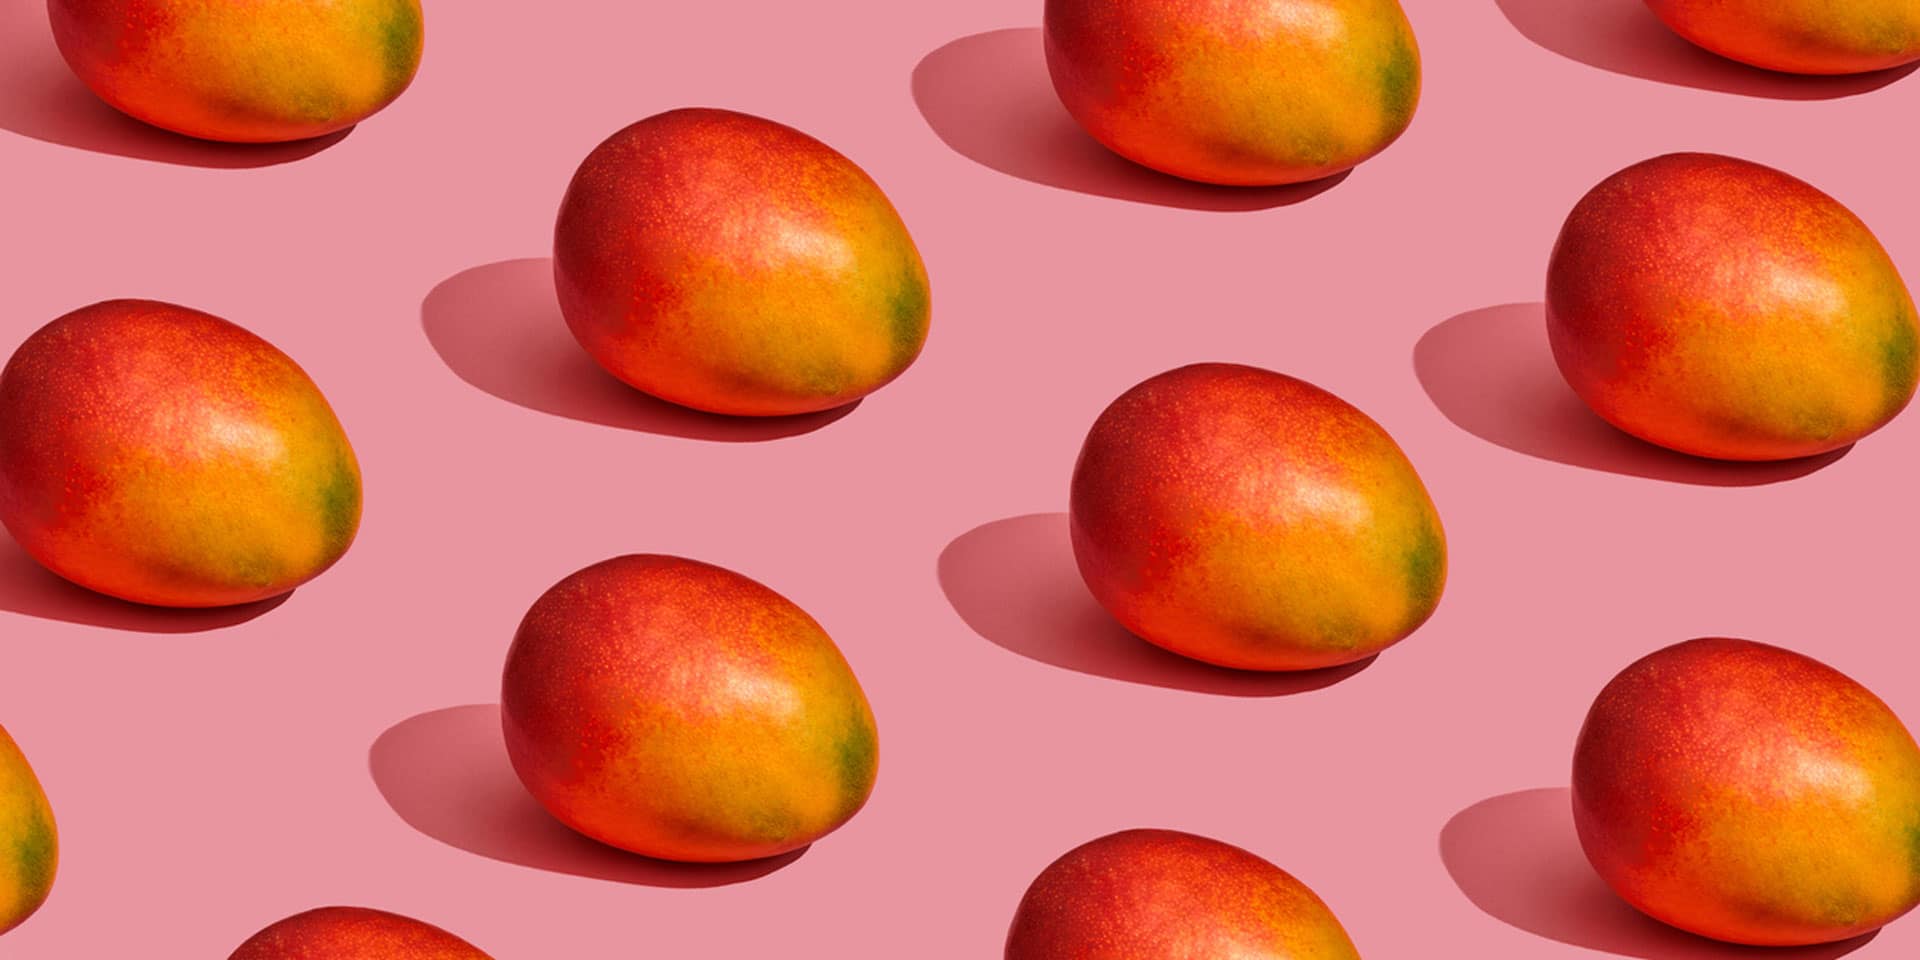 A pattern of ripe, colorful mangoes against a uniform pink background, symbolizing a new age spiritual journey.